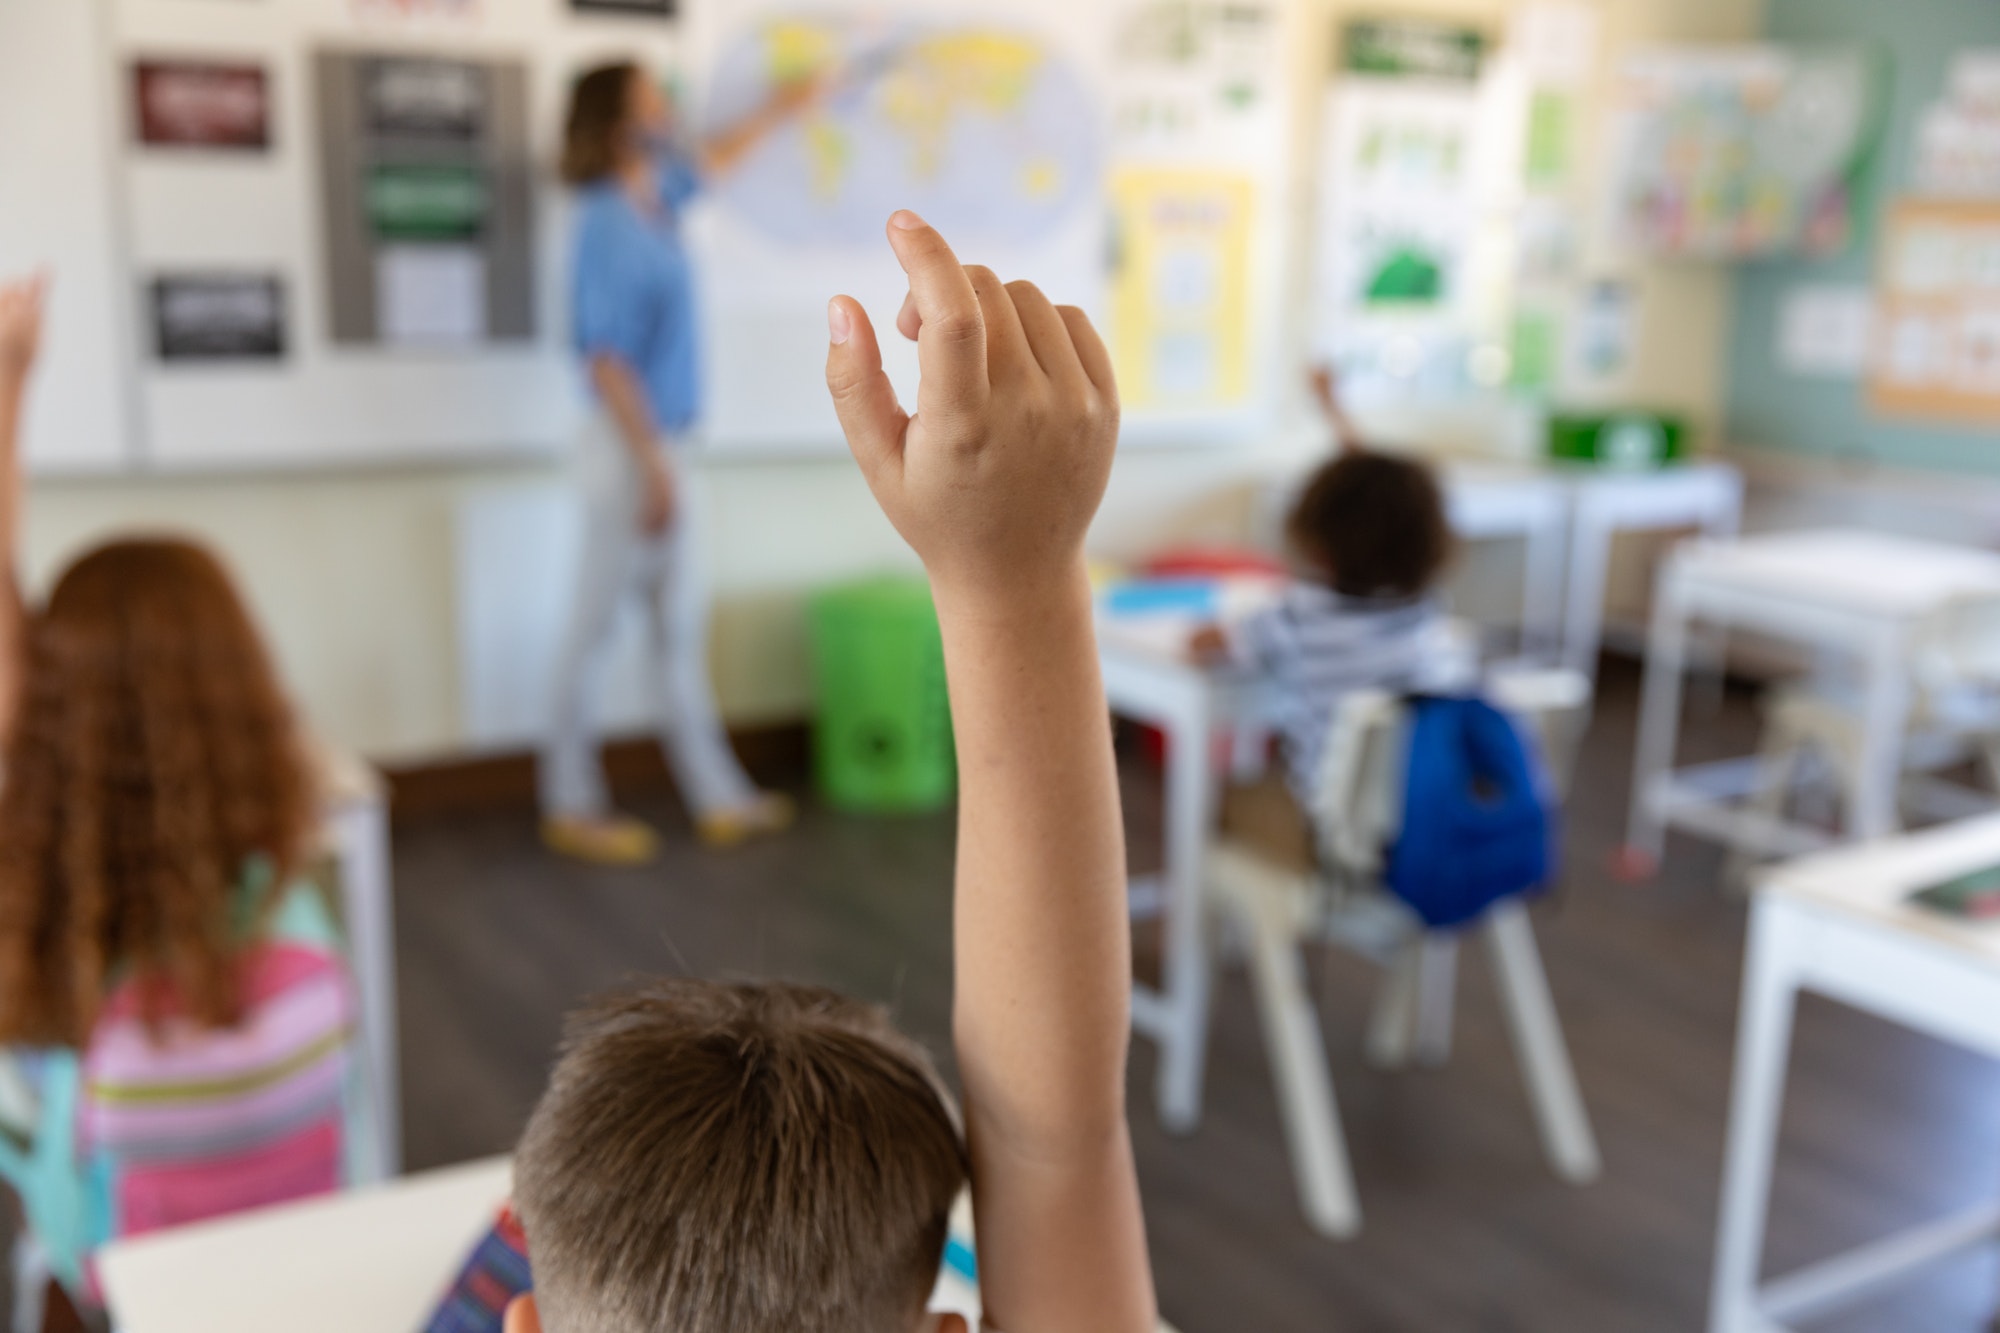 Students raising hands in class at school